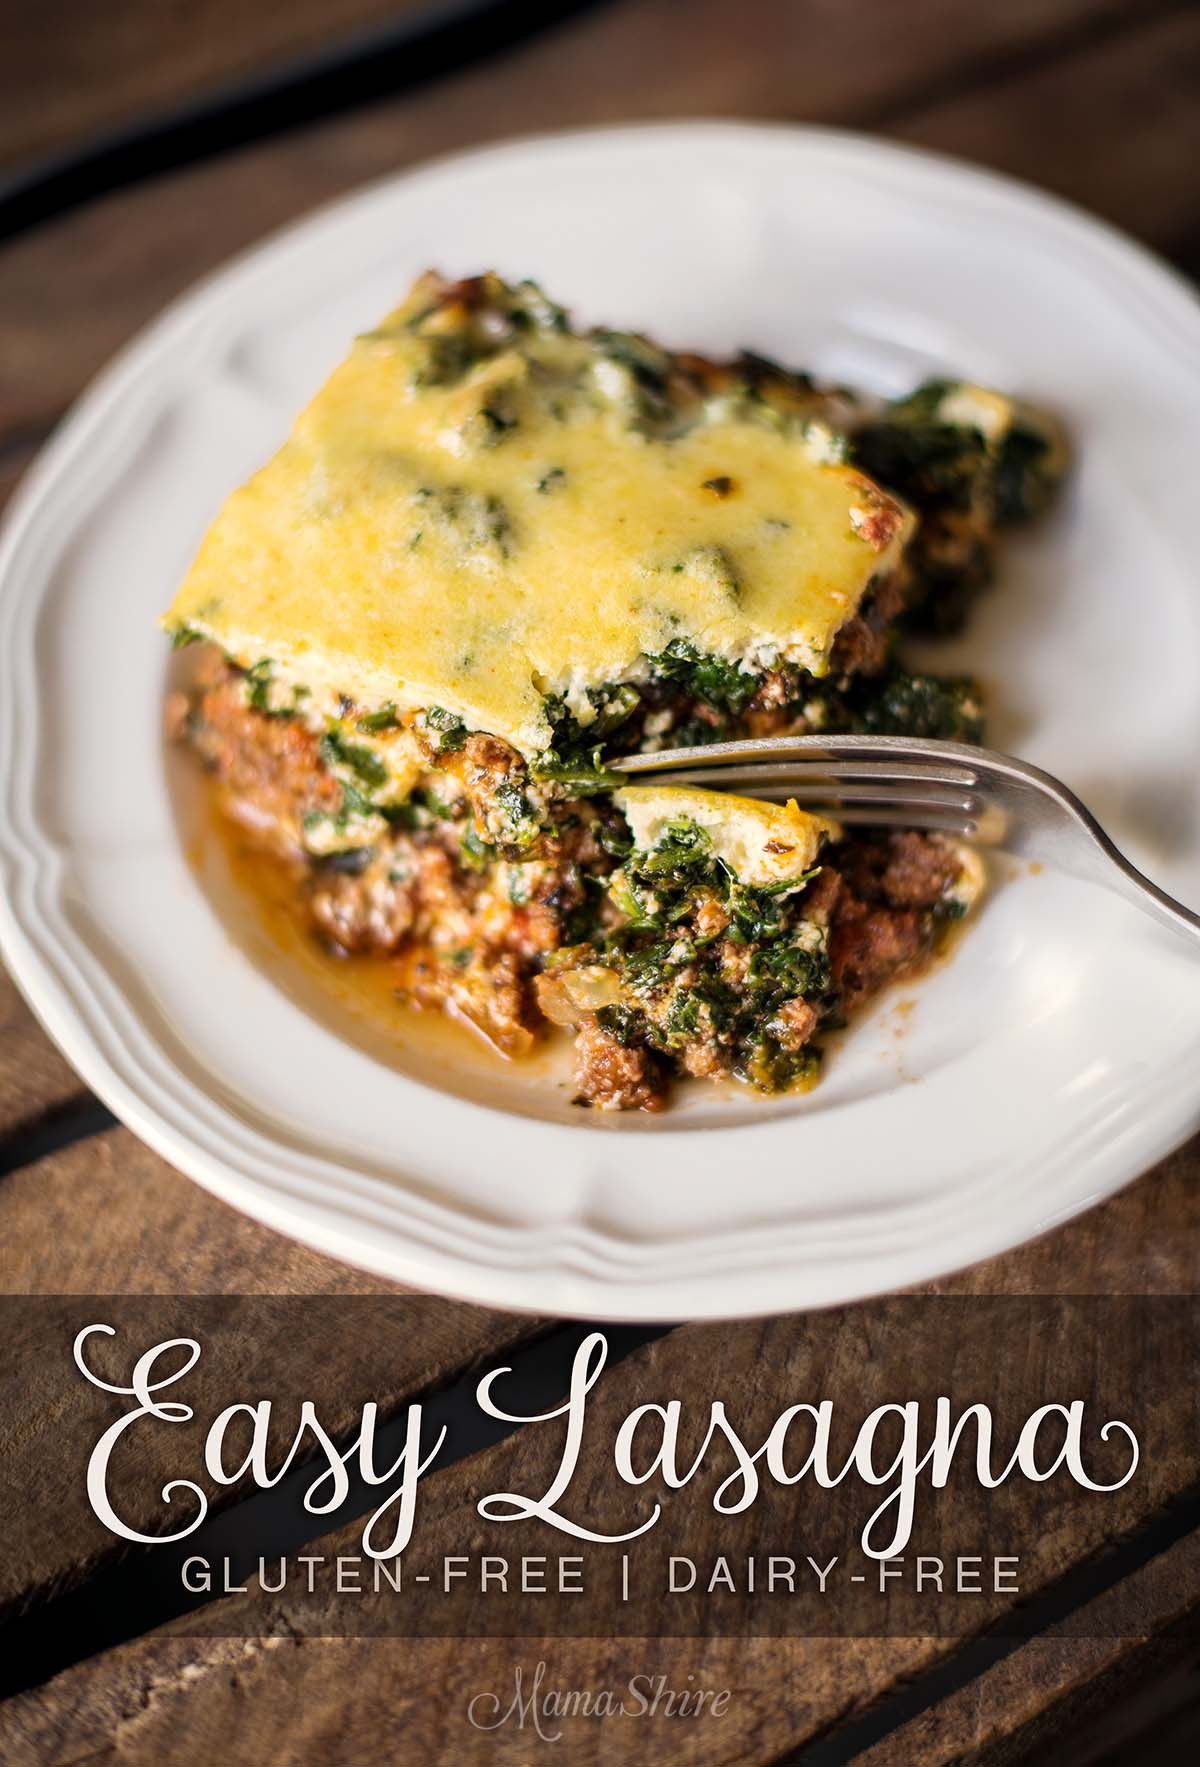 Easy Gluten And Dairy Free Recipes
 Easy Lasagna Gluten Free & Dairy Free MamaShireMamaShire